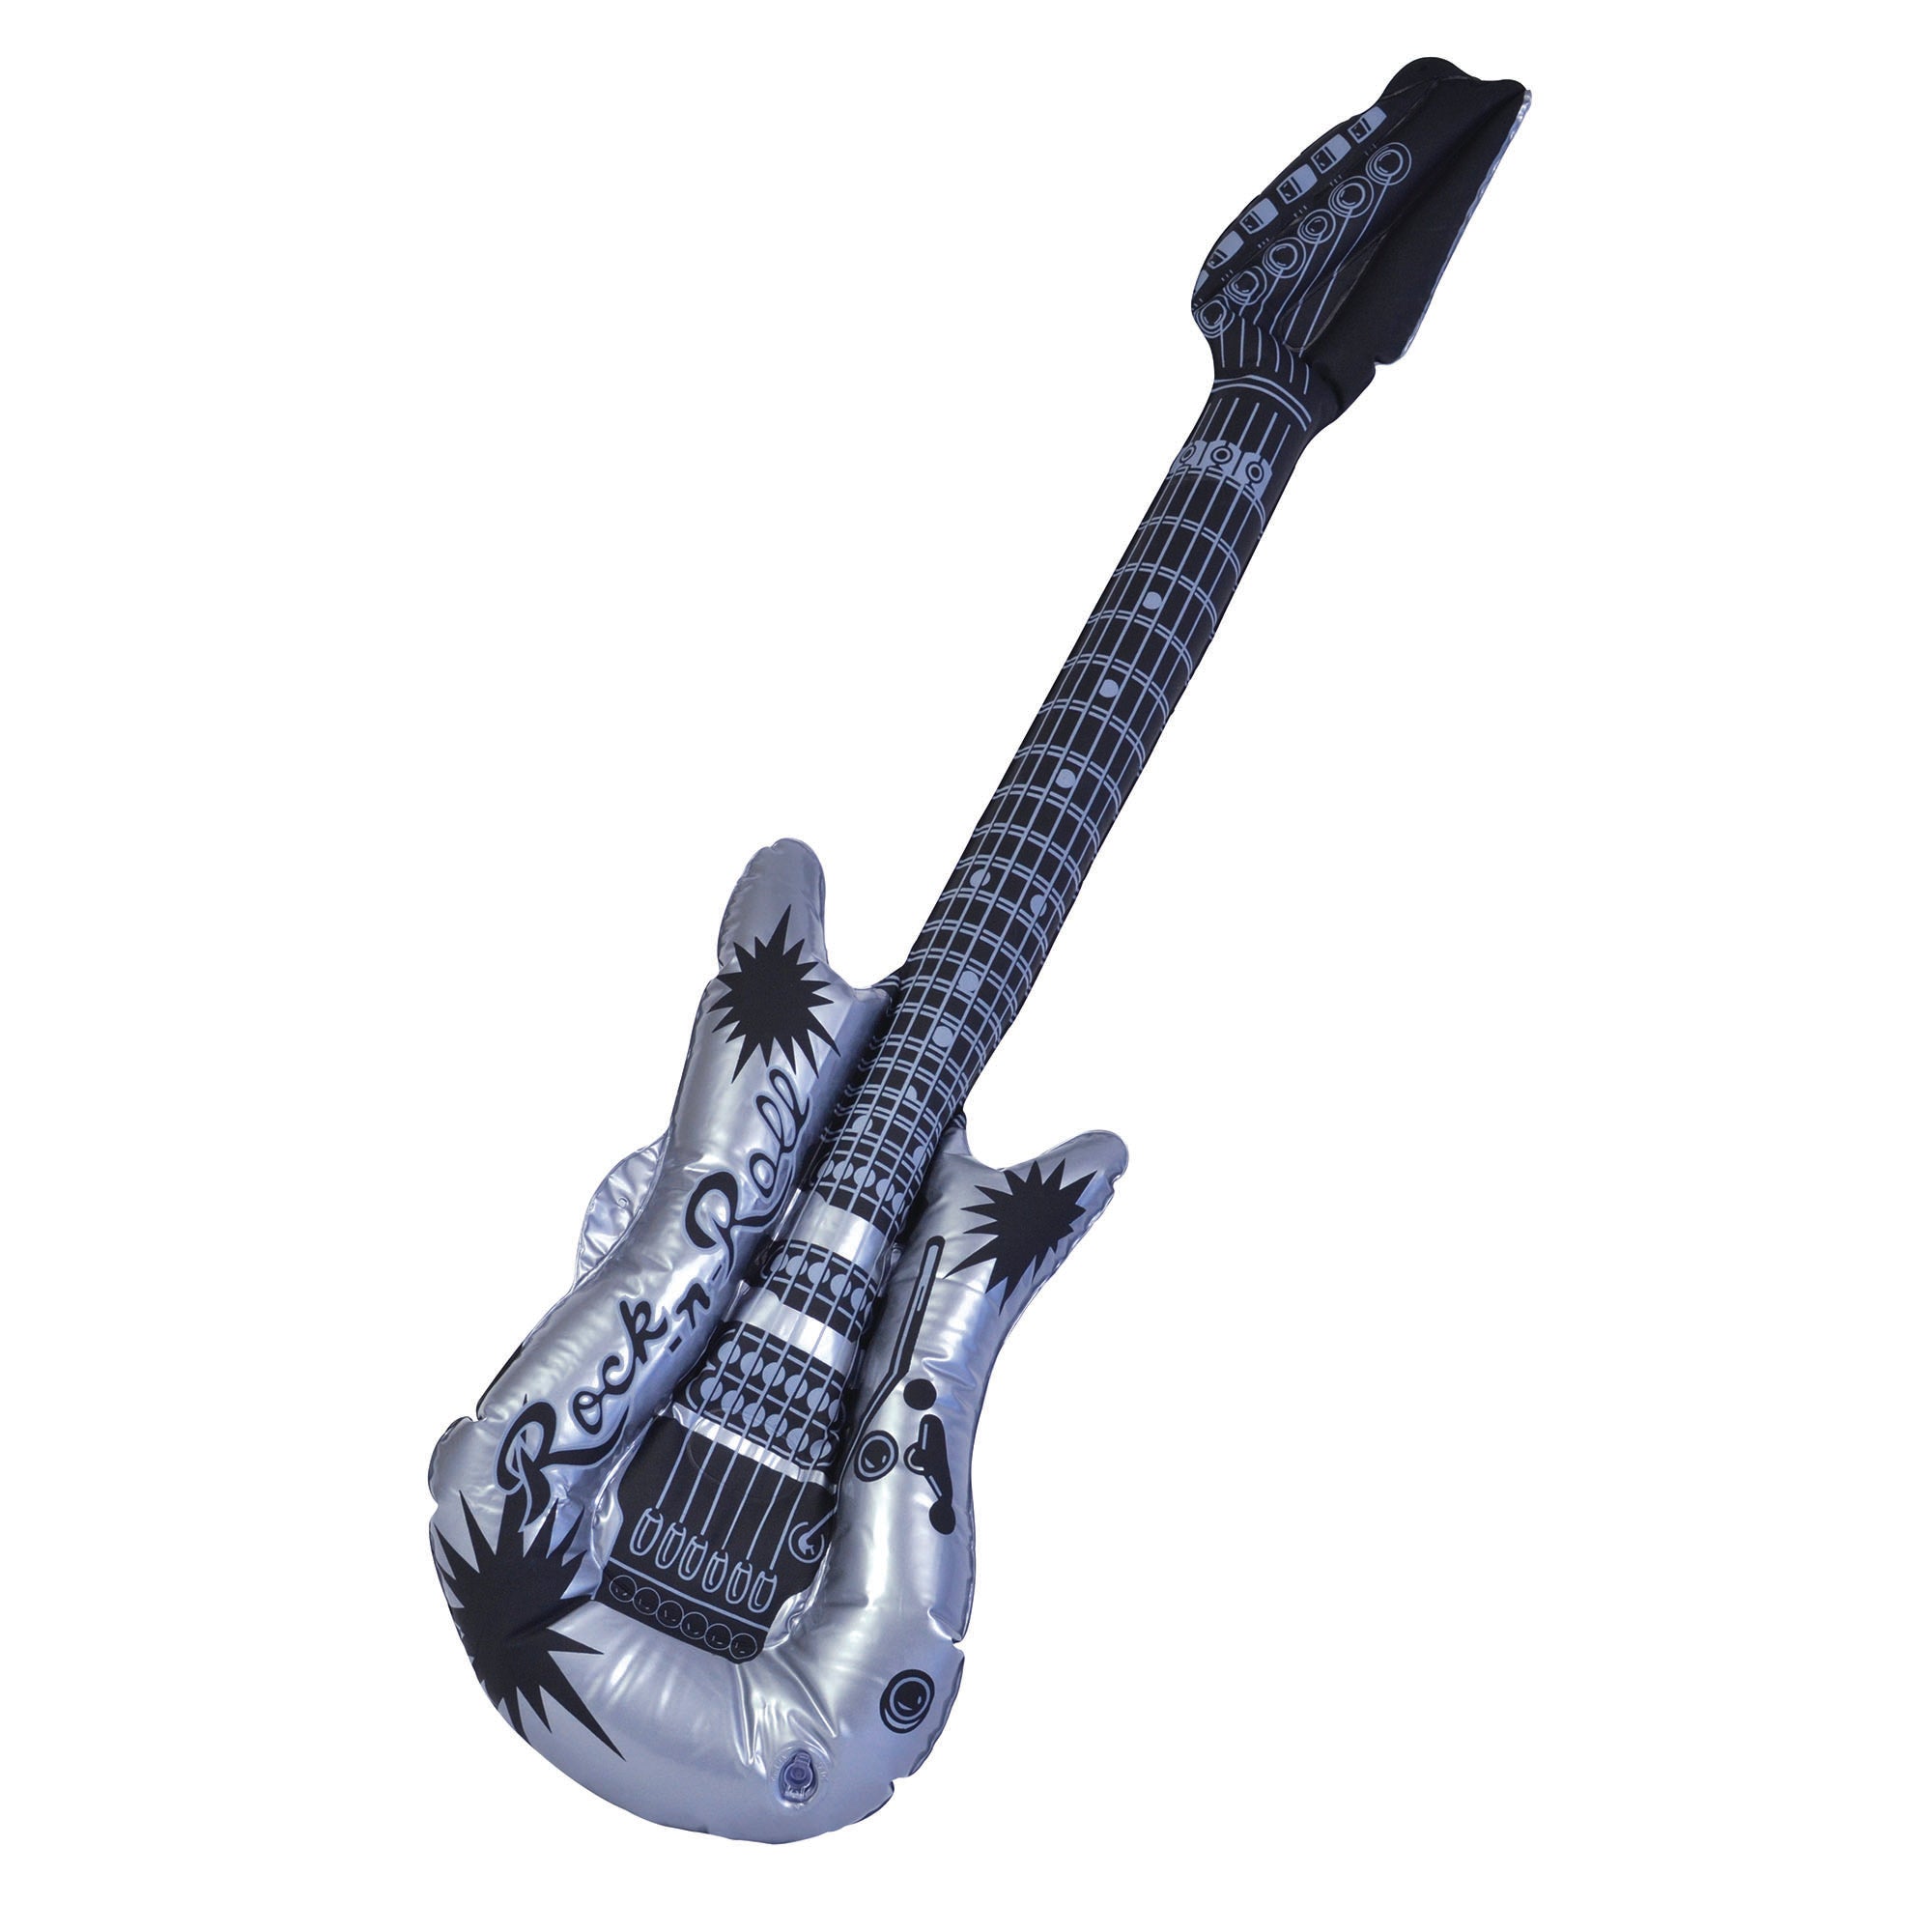 Inflatable Rock n' Roll Guitar